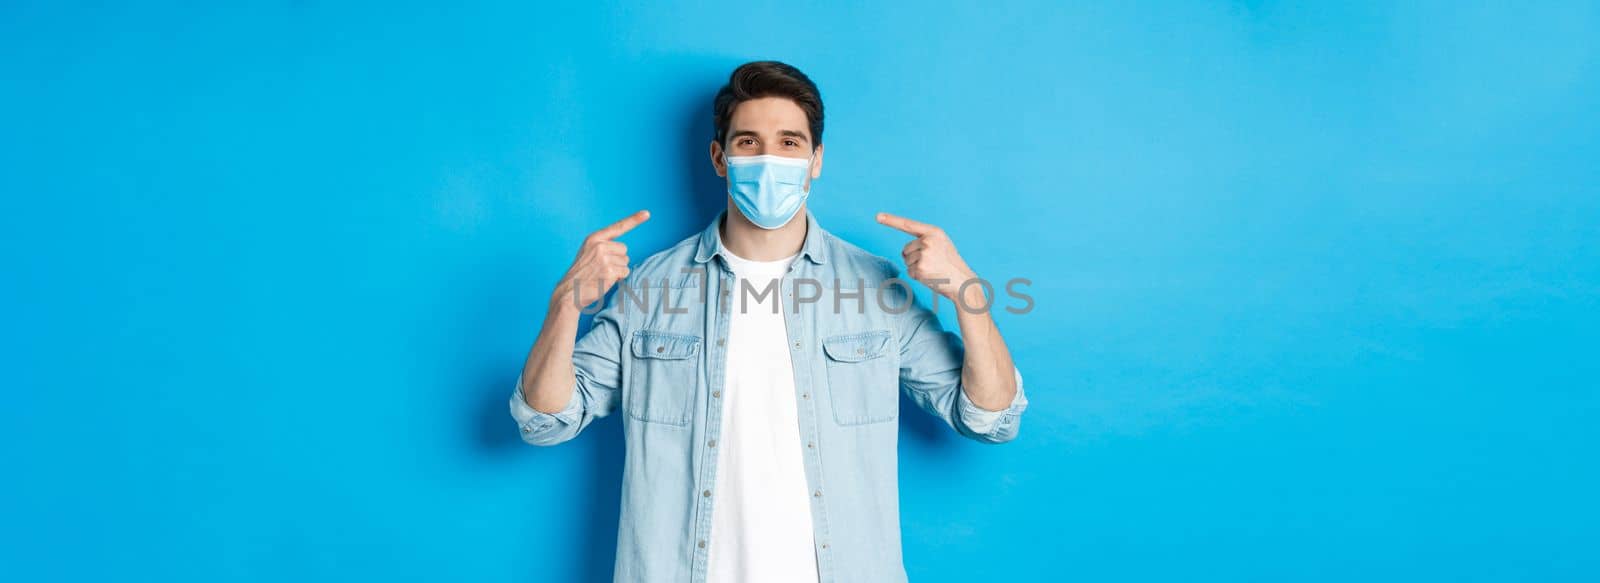 Concept of coronavirus, quarantine and social distancing. Handsome man pointing at medical mask and smiling, protection from virus spread during pandemic, blue background.